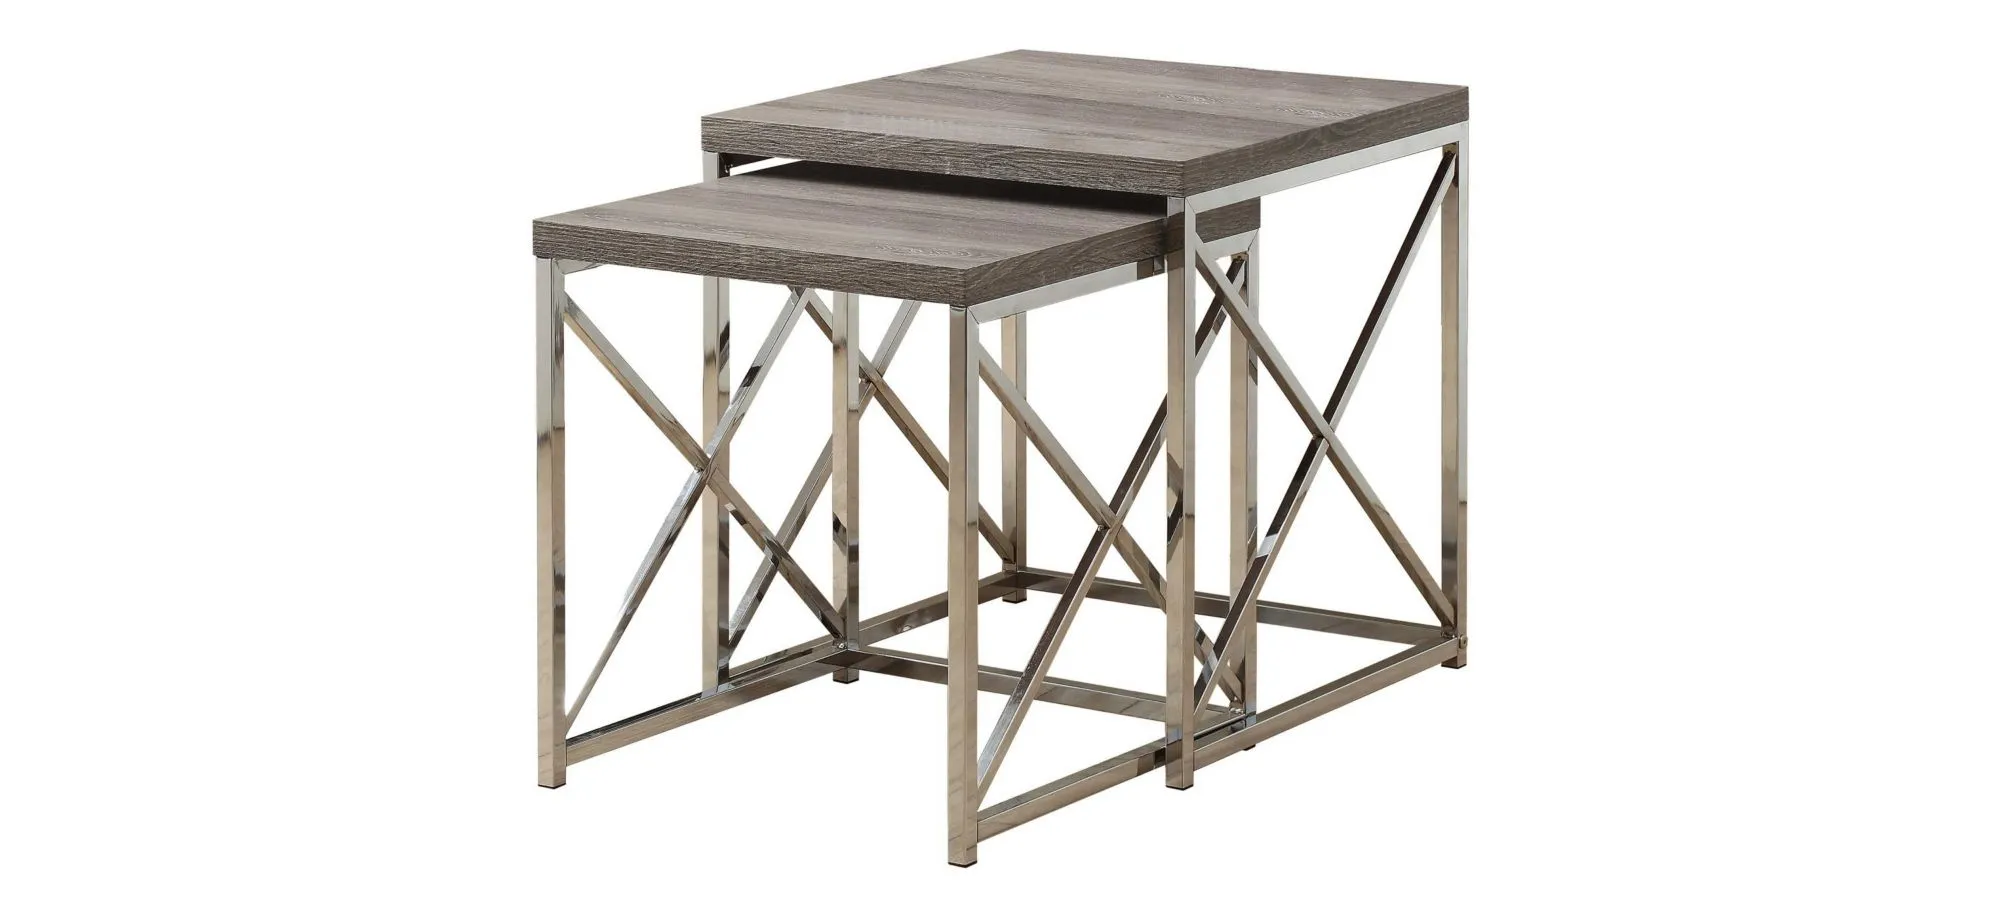 Haan Nesting Tables: Set of 2 in Dark Taupe / Chrome by Monarch Specialties